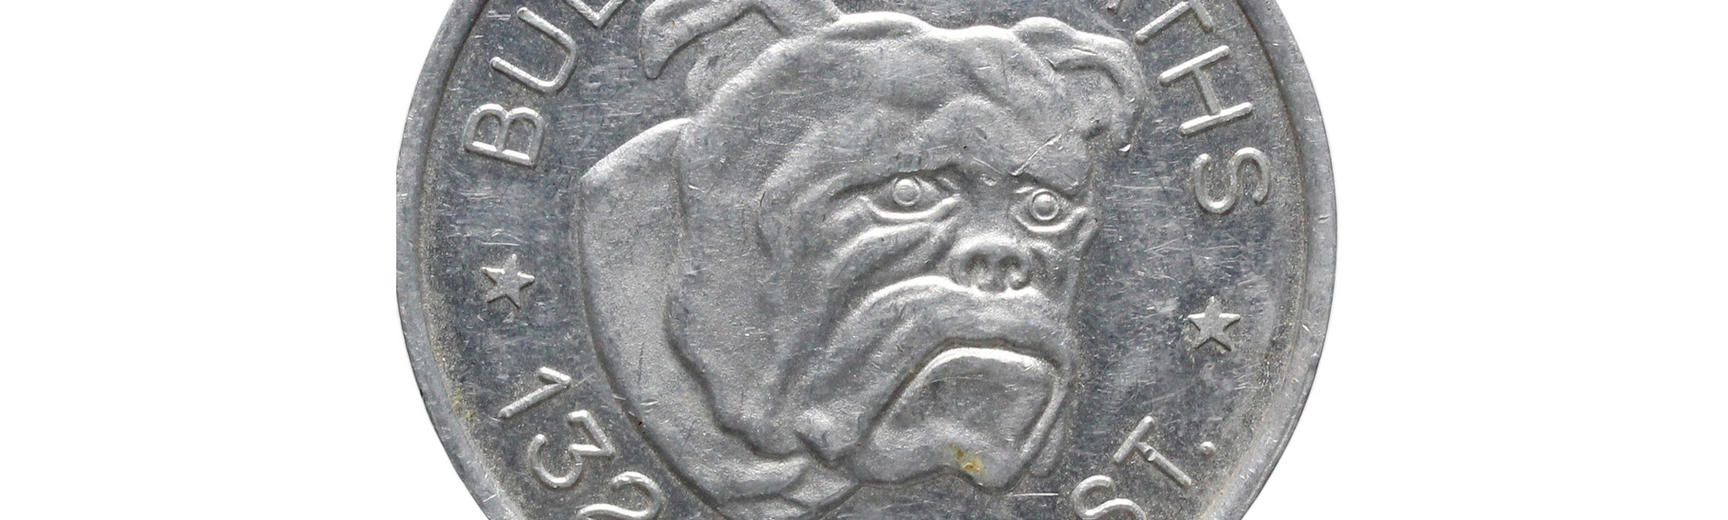 A silver token which shows the face of a bulldog. 'Bulldog Baths * 132 Turk St' is written around the image of the bulldog. 